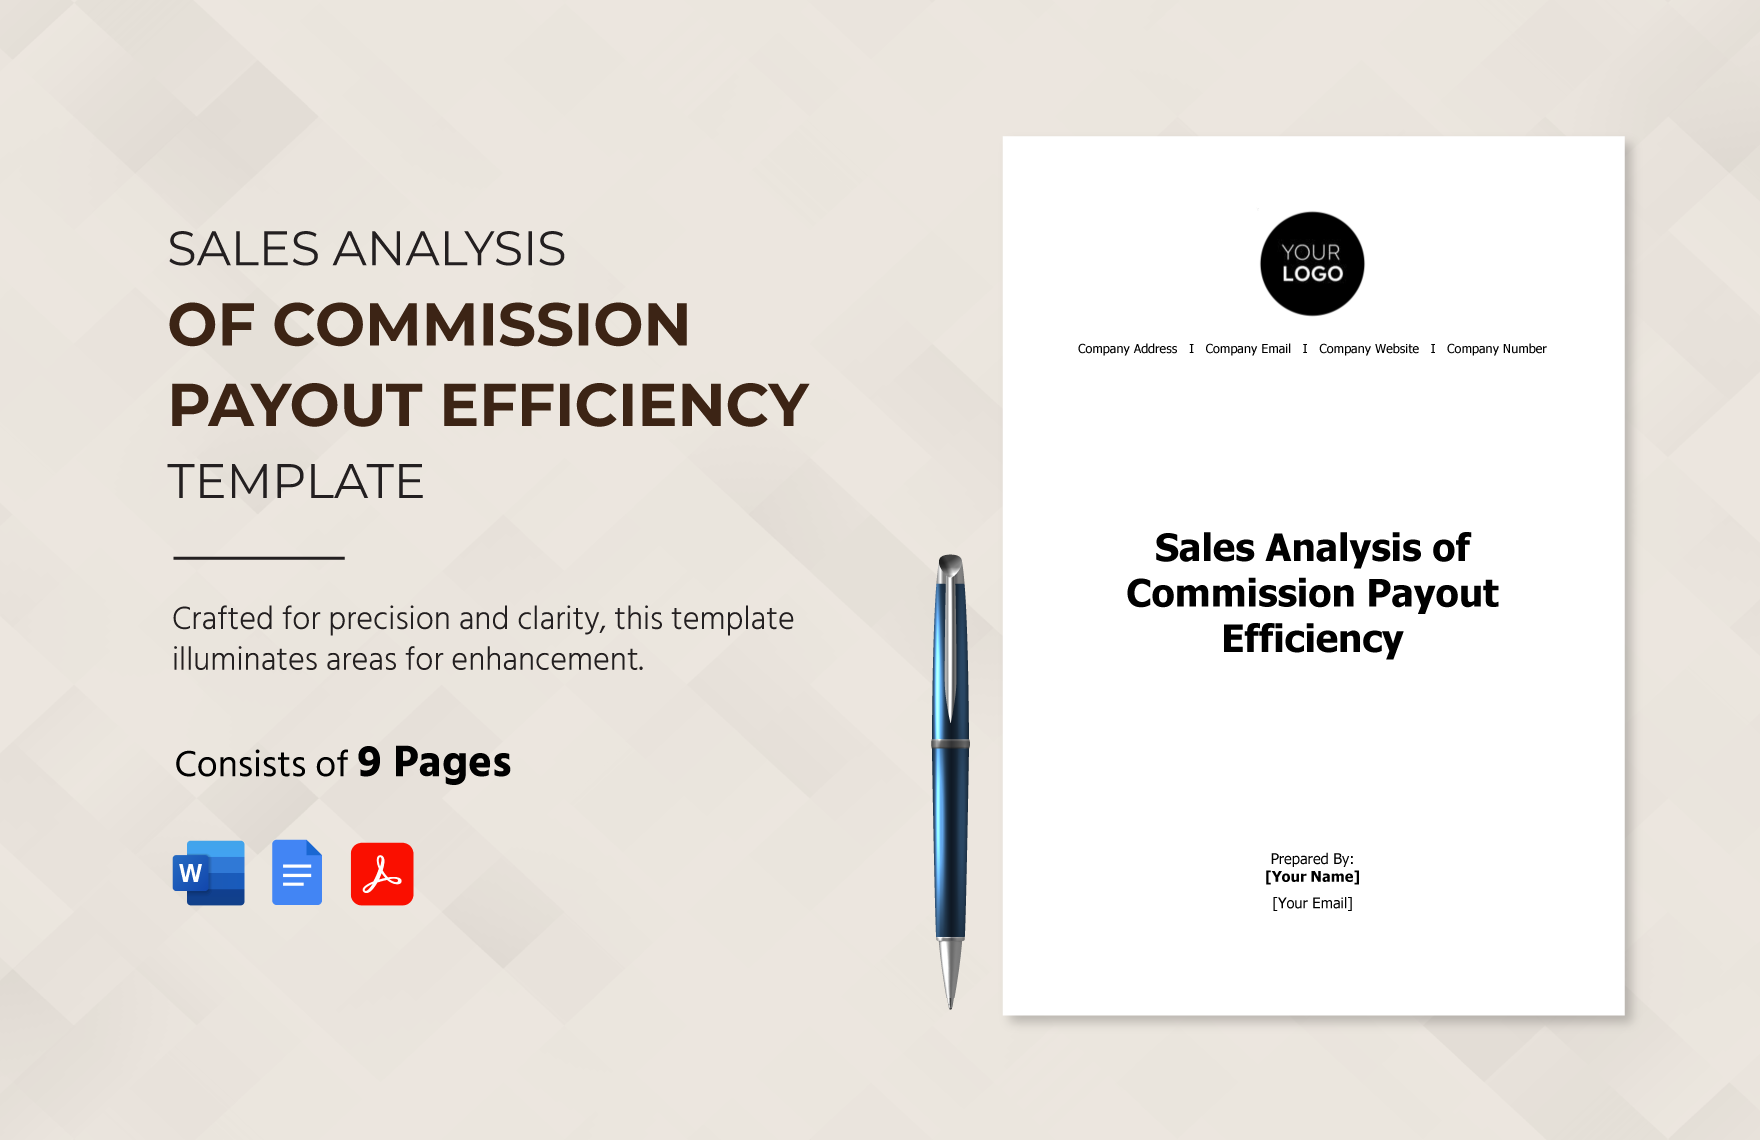 Sales Analysis of Commission Payout Efficiency Template